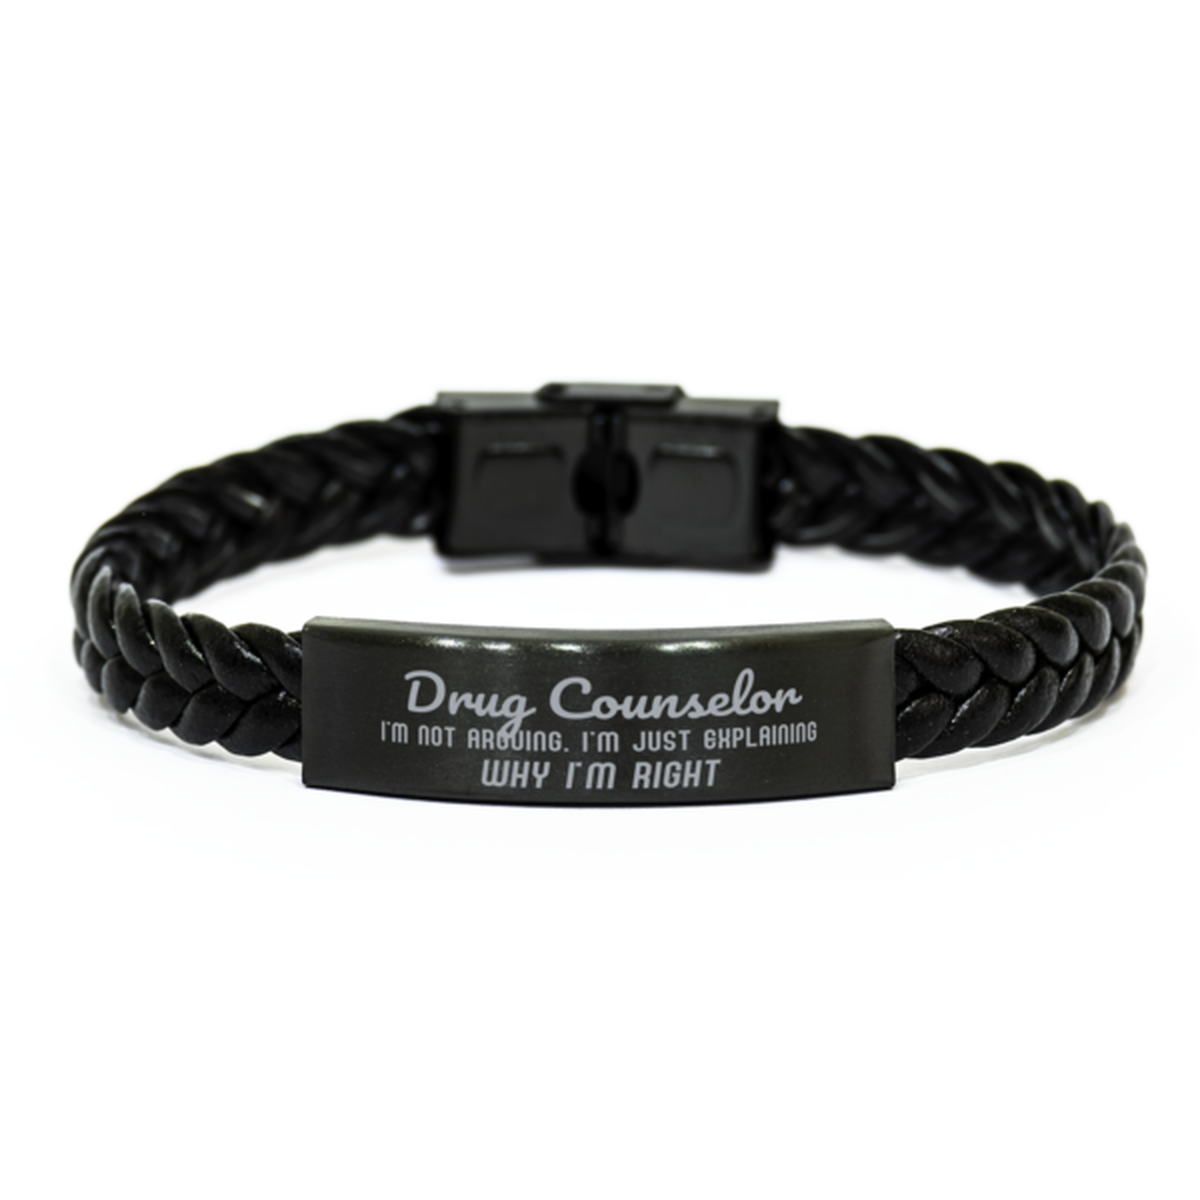 Drug Counselor I'm not Arguing. I'm Just Explaining Why I'm RIGHT Braided Leather Bracelet, Graduation Birthday Christmas Drug Counselor Gifts For Drug Counselor Funny Saying Quote Present for Men Women Coworker